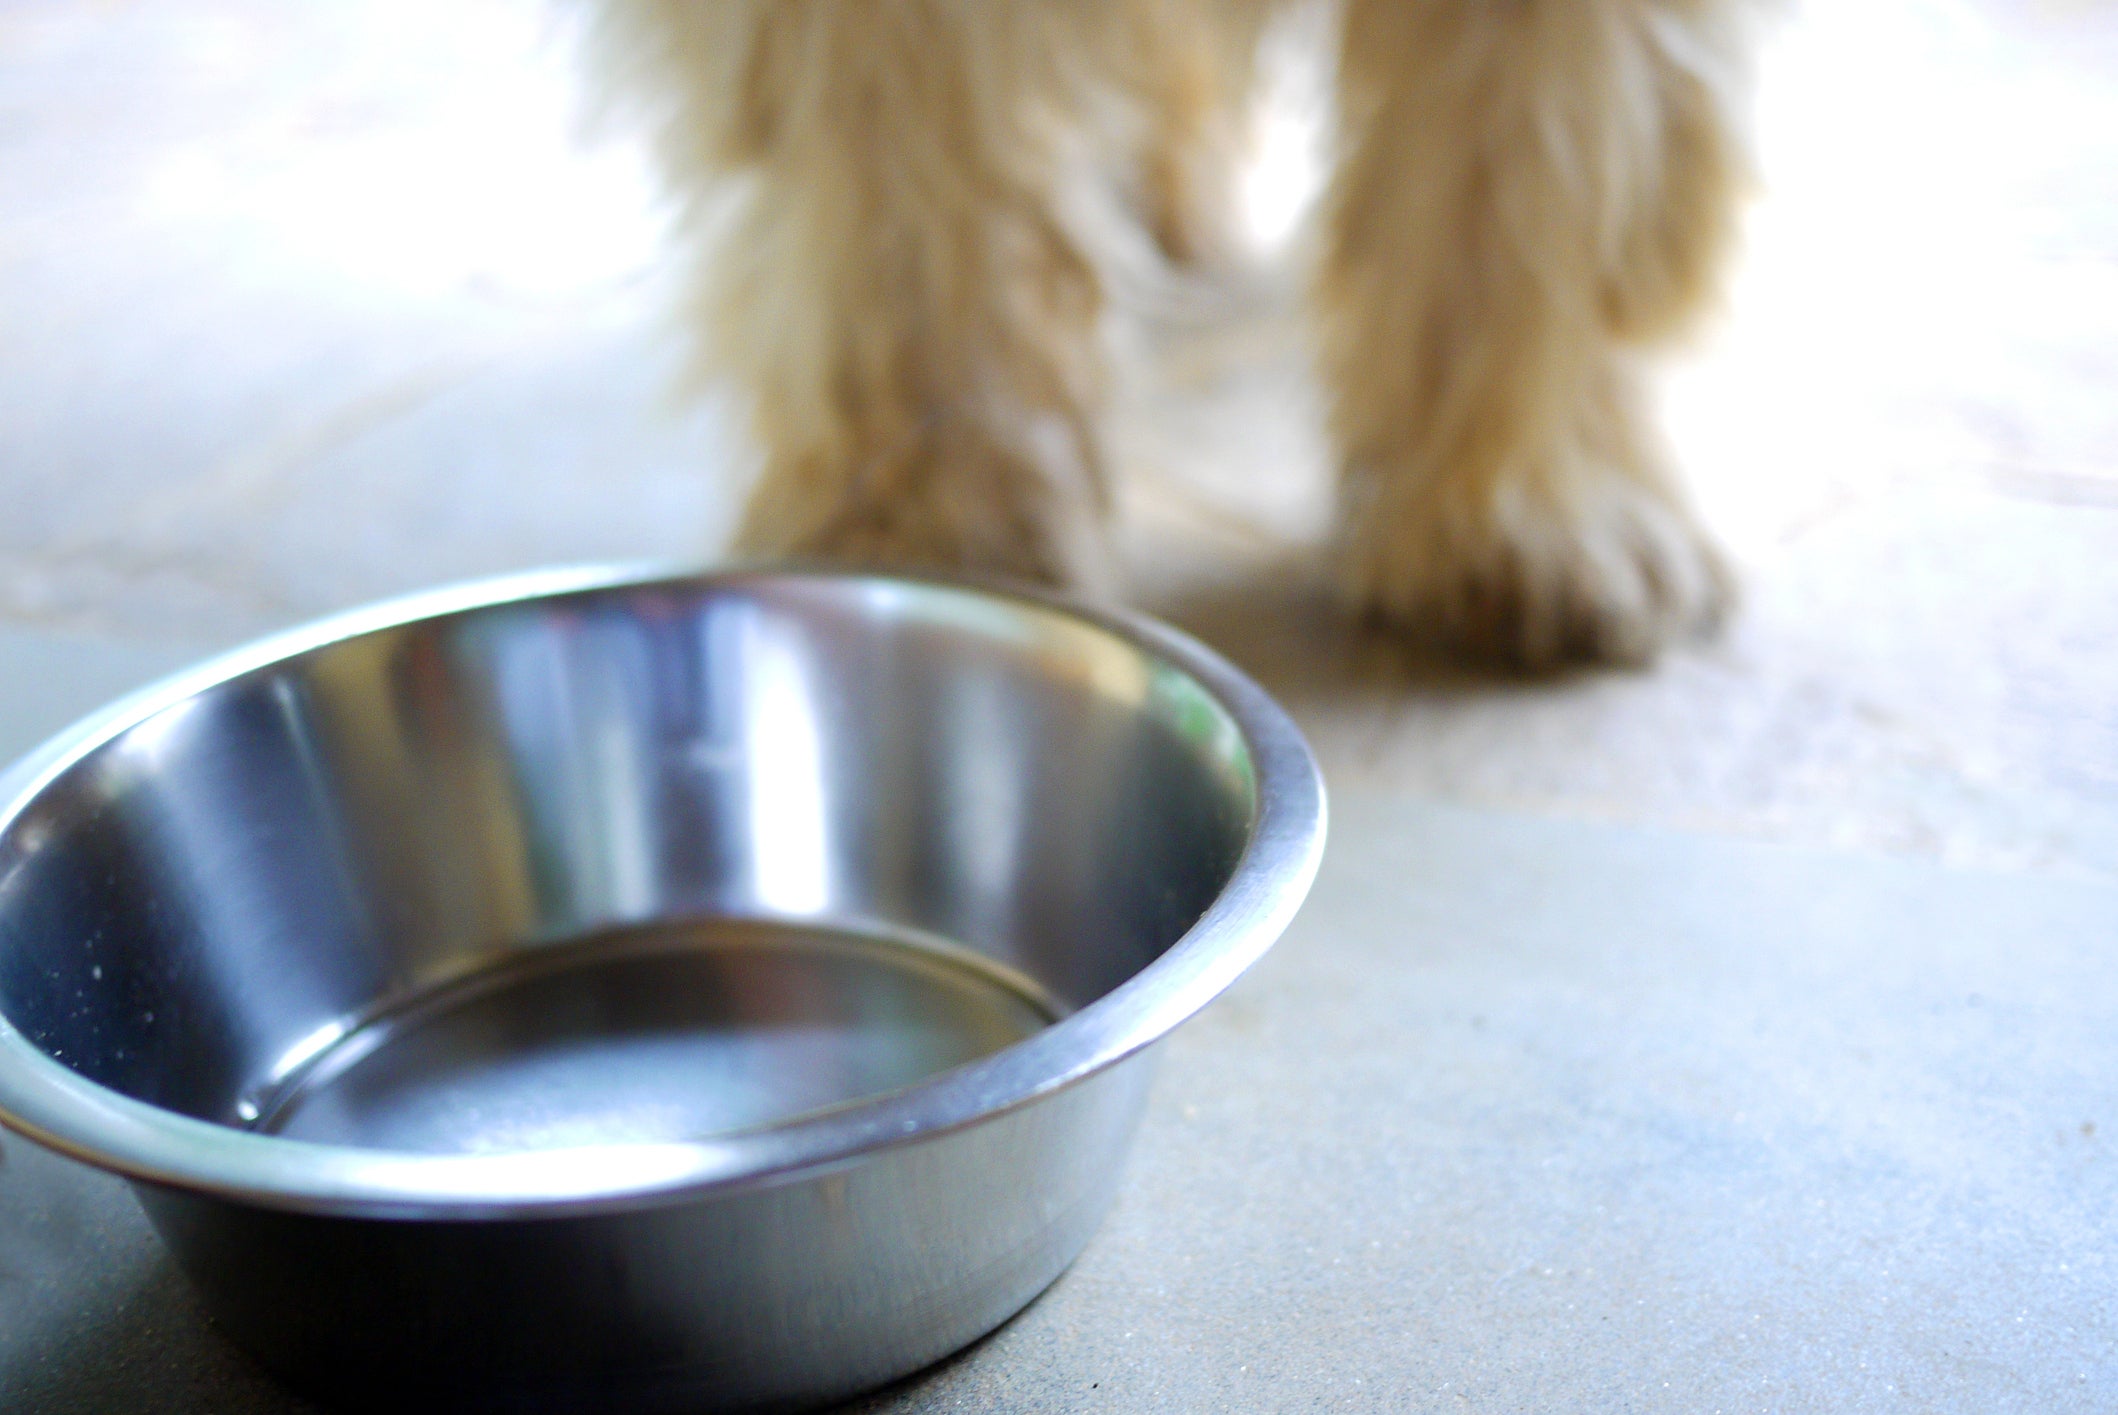 How to Clean and Sanitize Dog and Other Pet Bowls | Clorox®